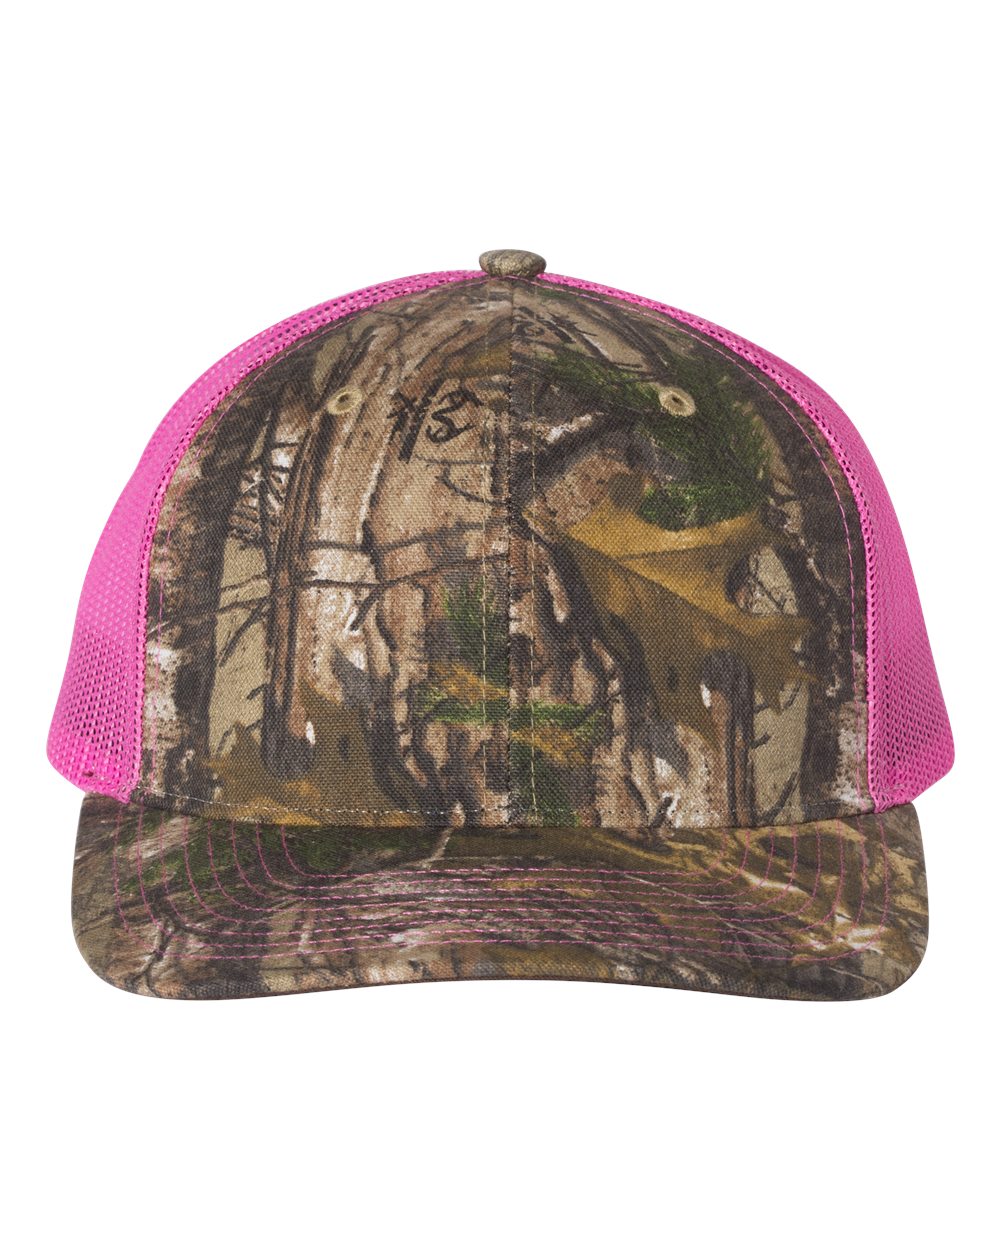 click to view Realtree Edge/Neon Pink